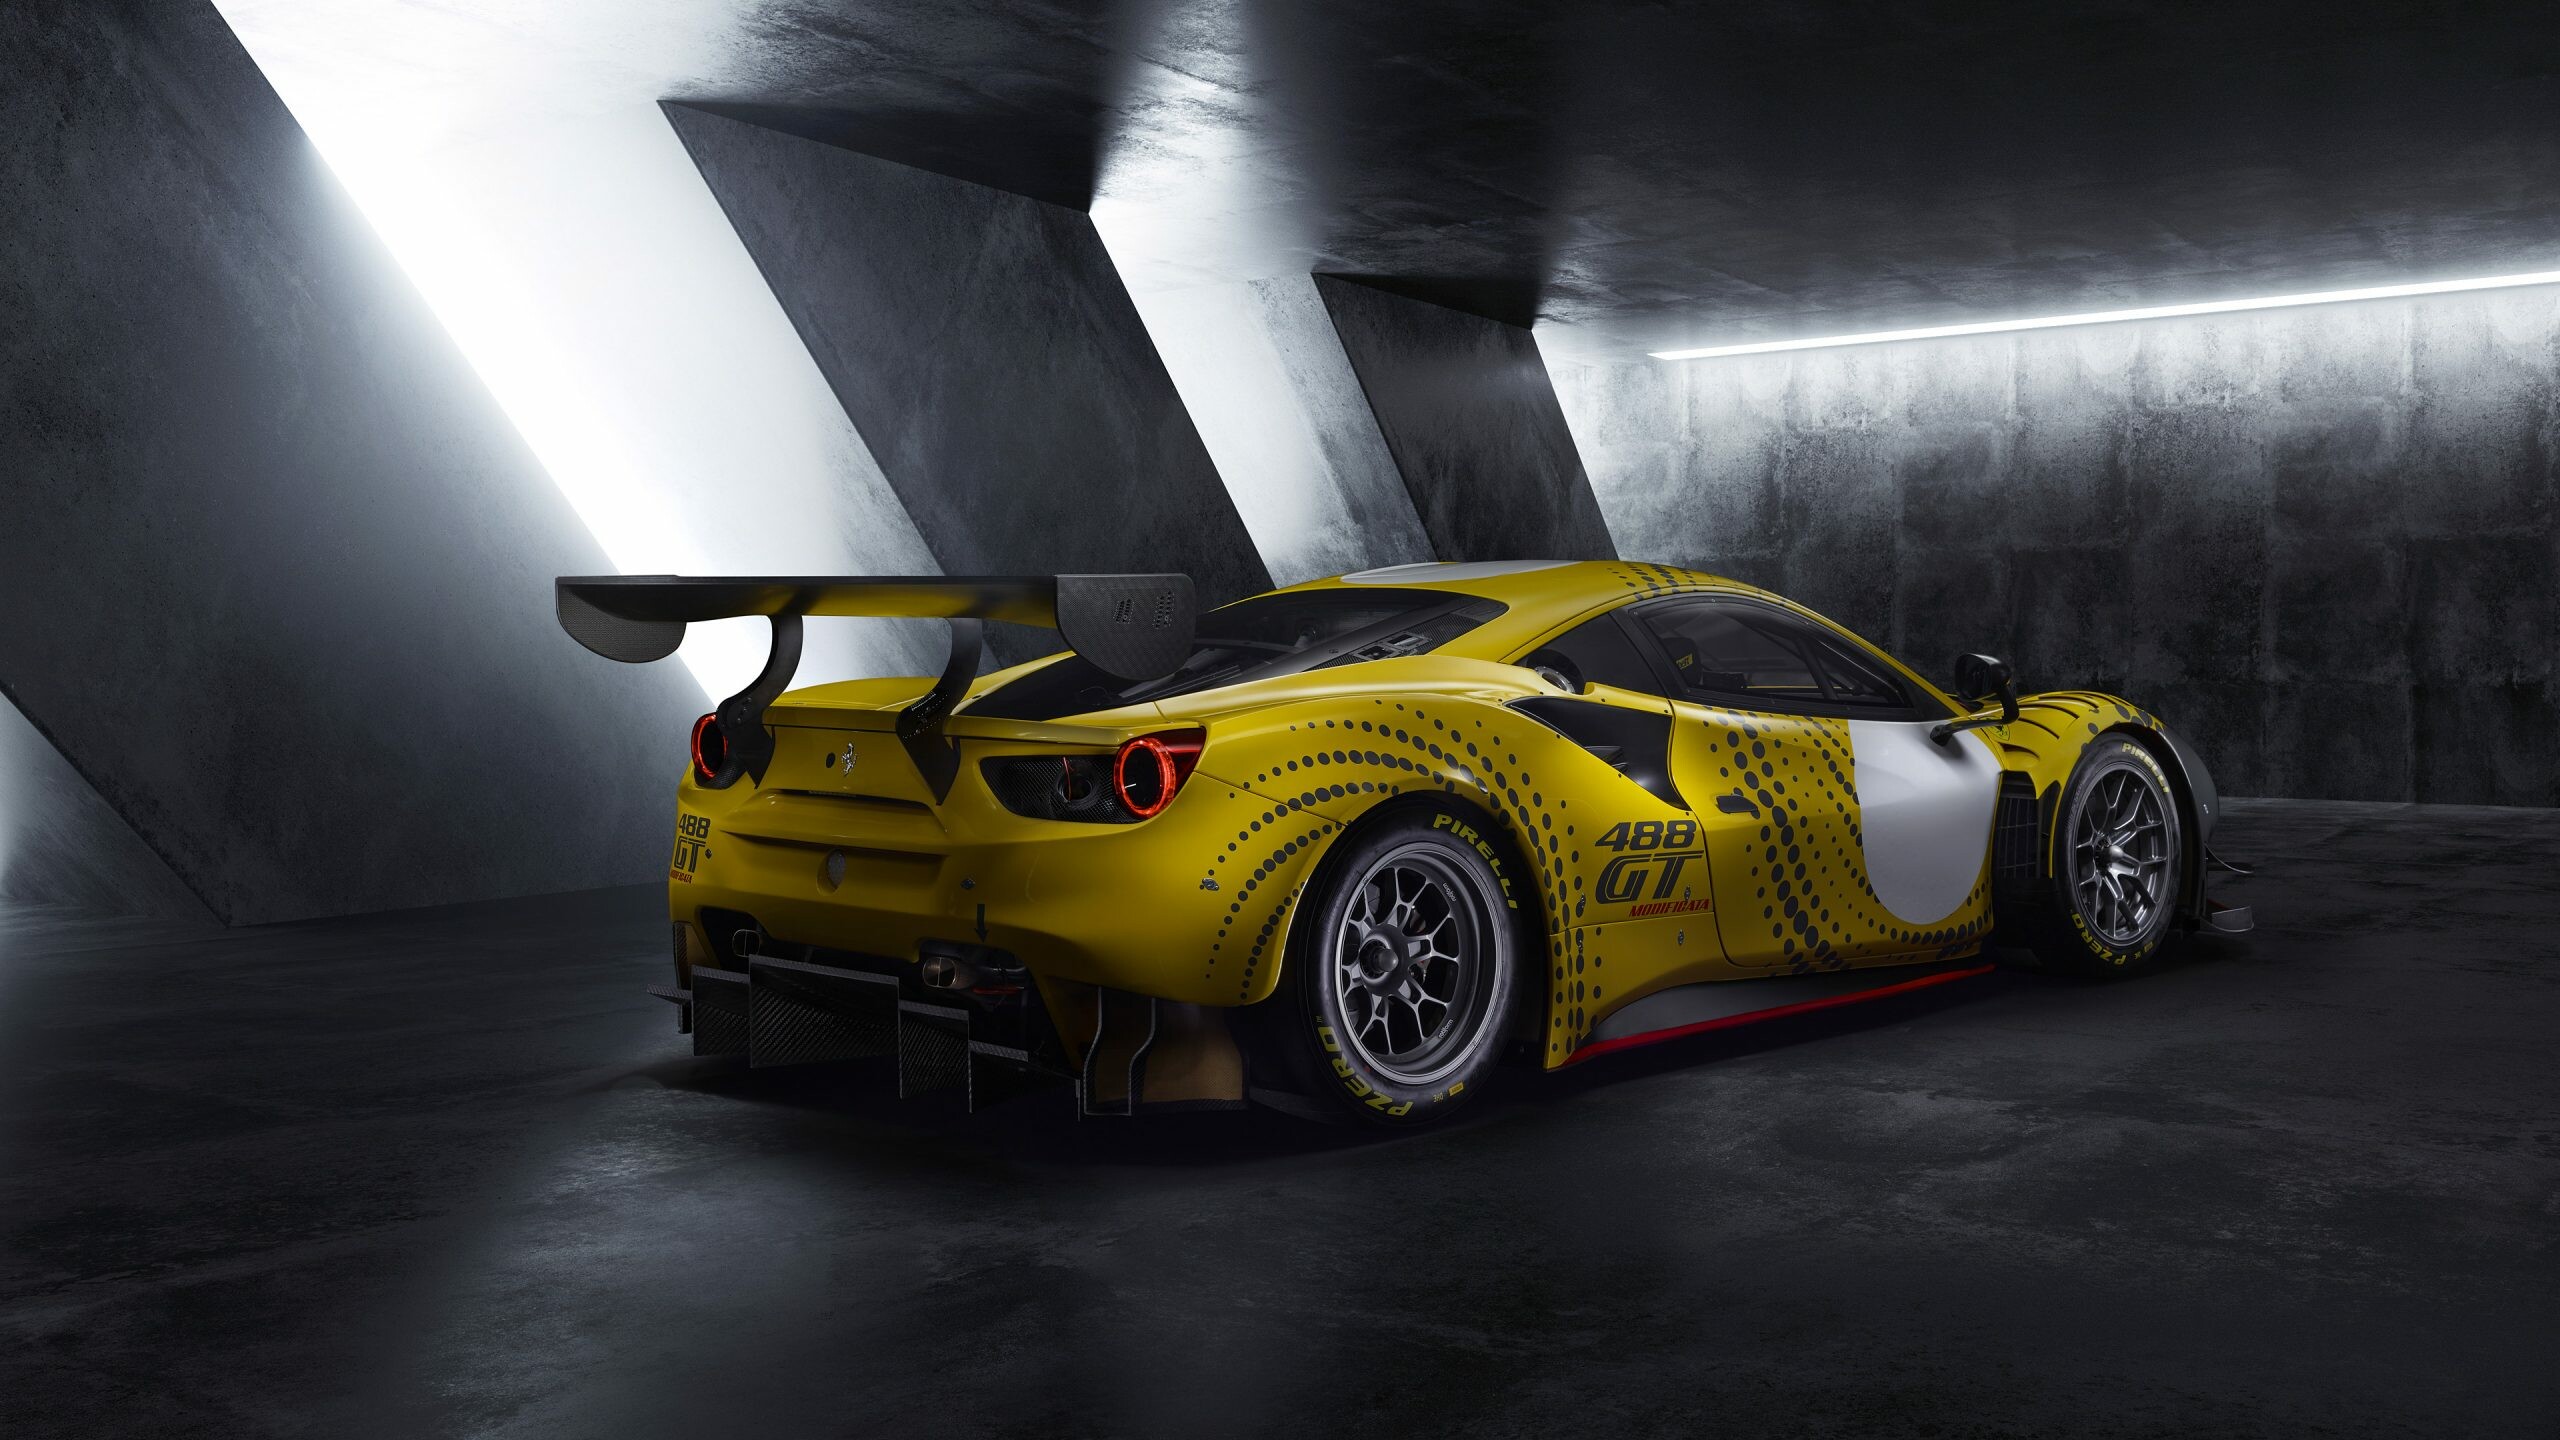 Ferrari: 2021, 488 GT Modificata, A limited edition car that incorporates the skills and technologies developed for the 488 GT3 and 488 GTE. 2560x1440 HD Wallpaper.